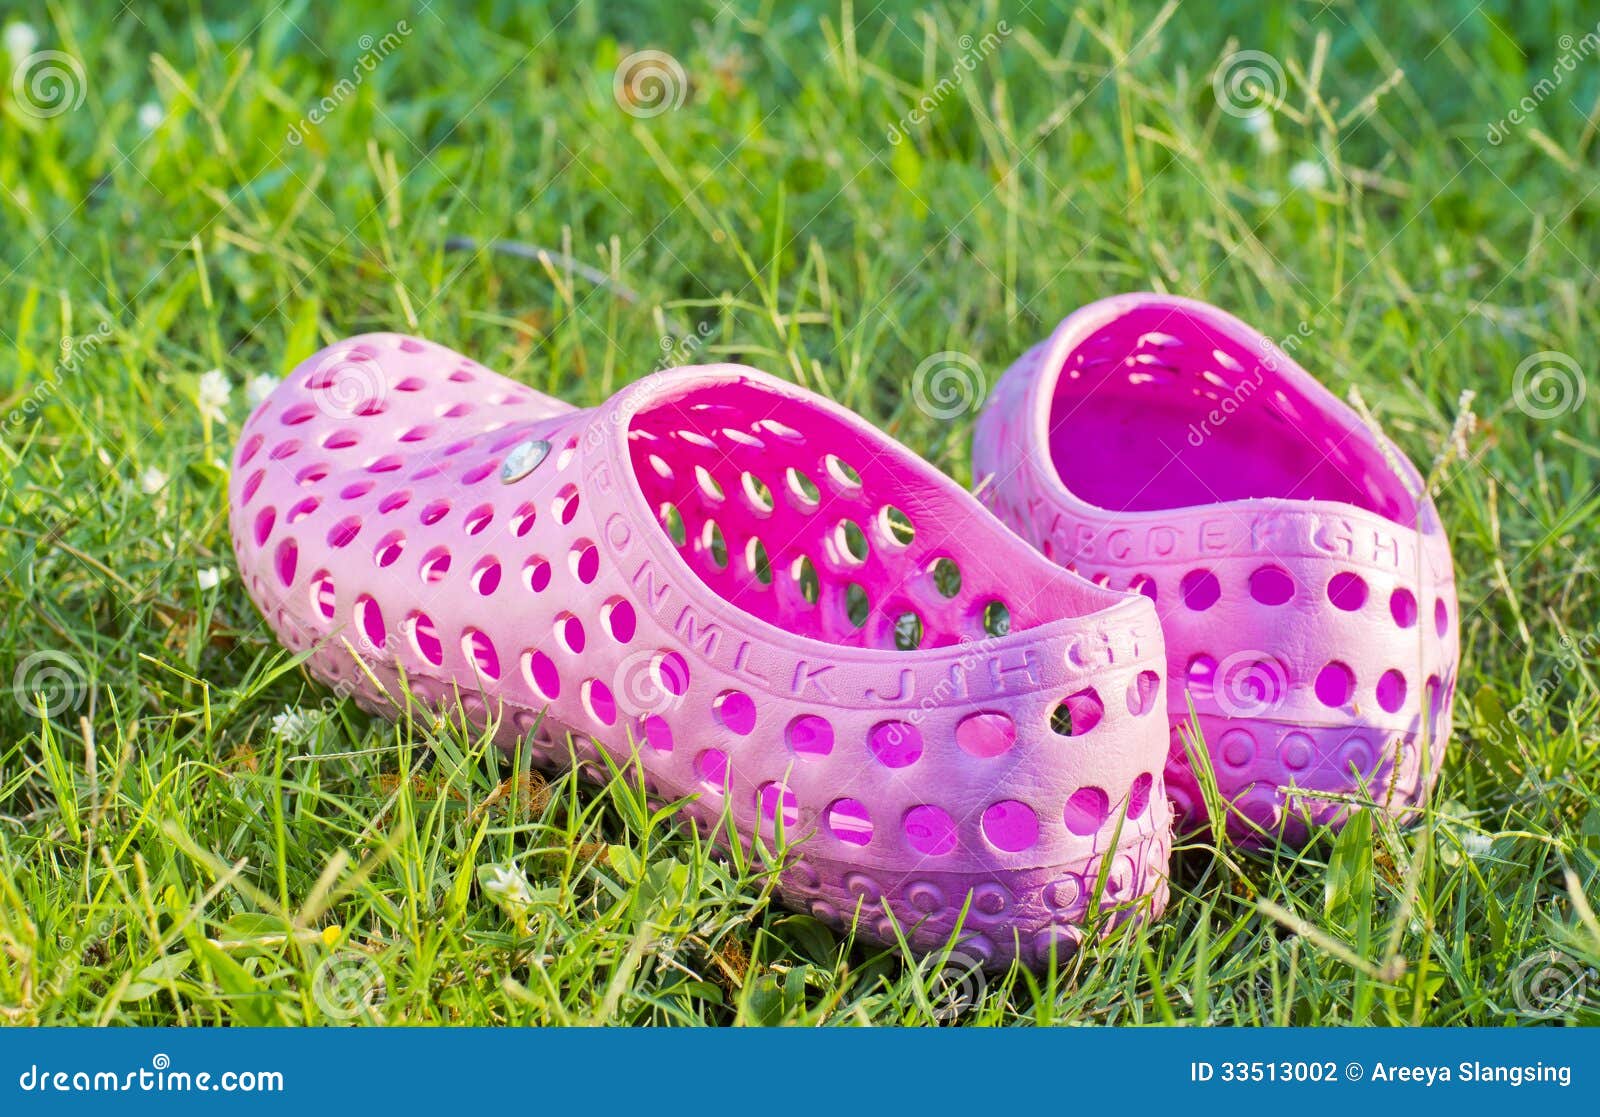 Well Worn Sandals Left on a Lawn Stock Photo - Image of lawn, worn ...